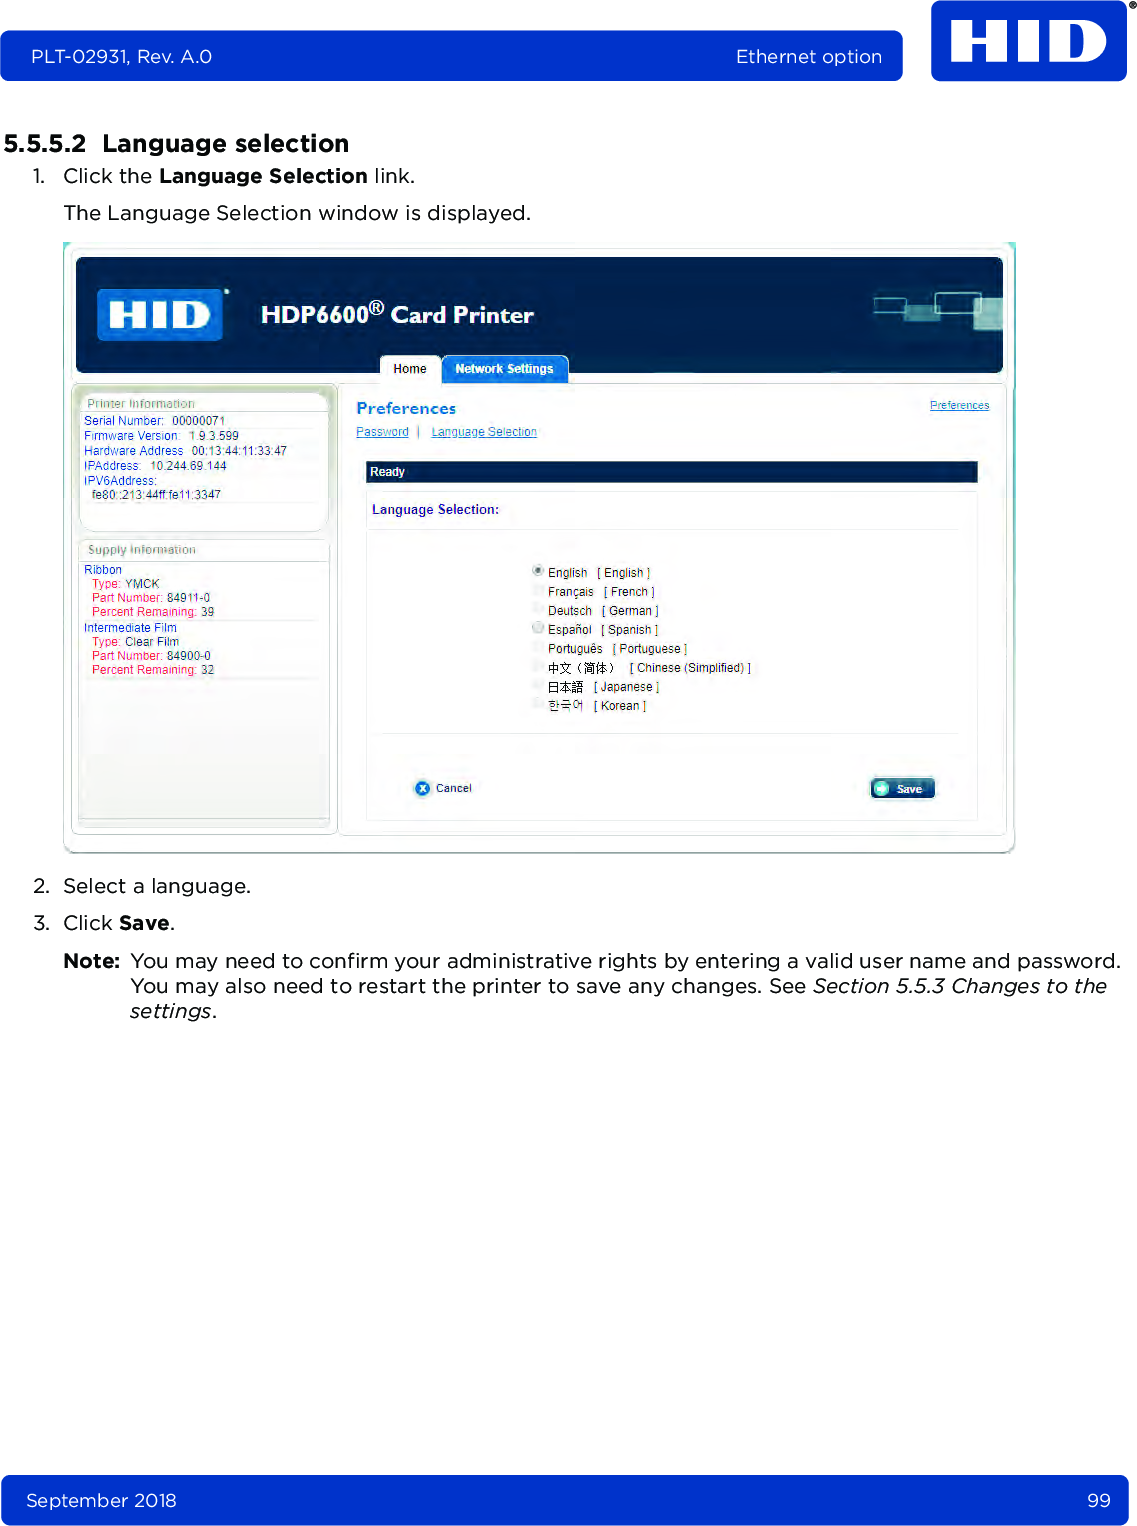 September 2018 99PLT-02931, Rev. A.0 Ethernet option5.5.5.2  Language selection1. Click the Language Selection link. The Language Selection window is displayed. 2. Select a language.3. Click Save.Note: You may need to confirm your administrative rights by entering a valid user name and password. You may also need to restart the printer to save any changes. See Section 5.5.3 Changes to the settings.